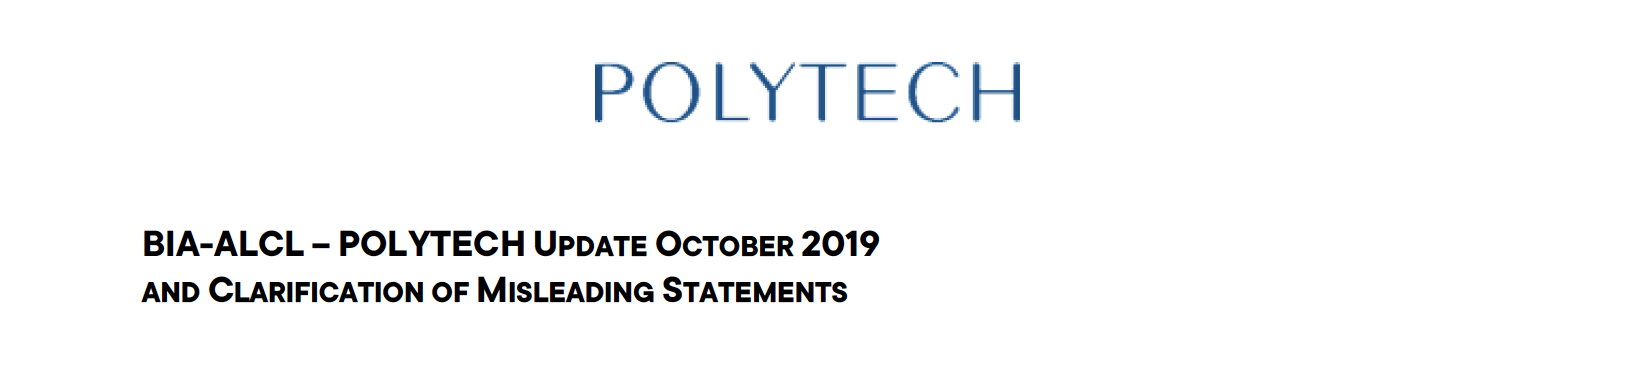 Wolfgang Steimel, CEO of POLYTECH, would like to explain the BIA-ALCL debate.